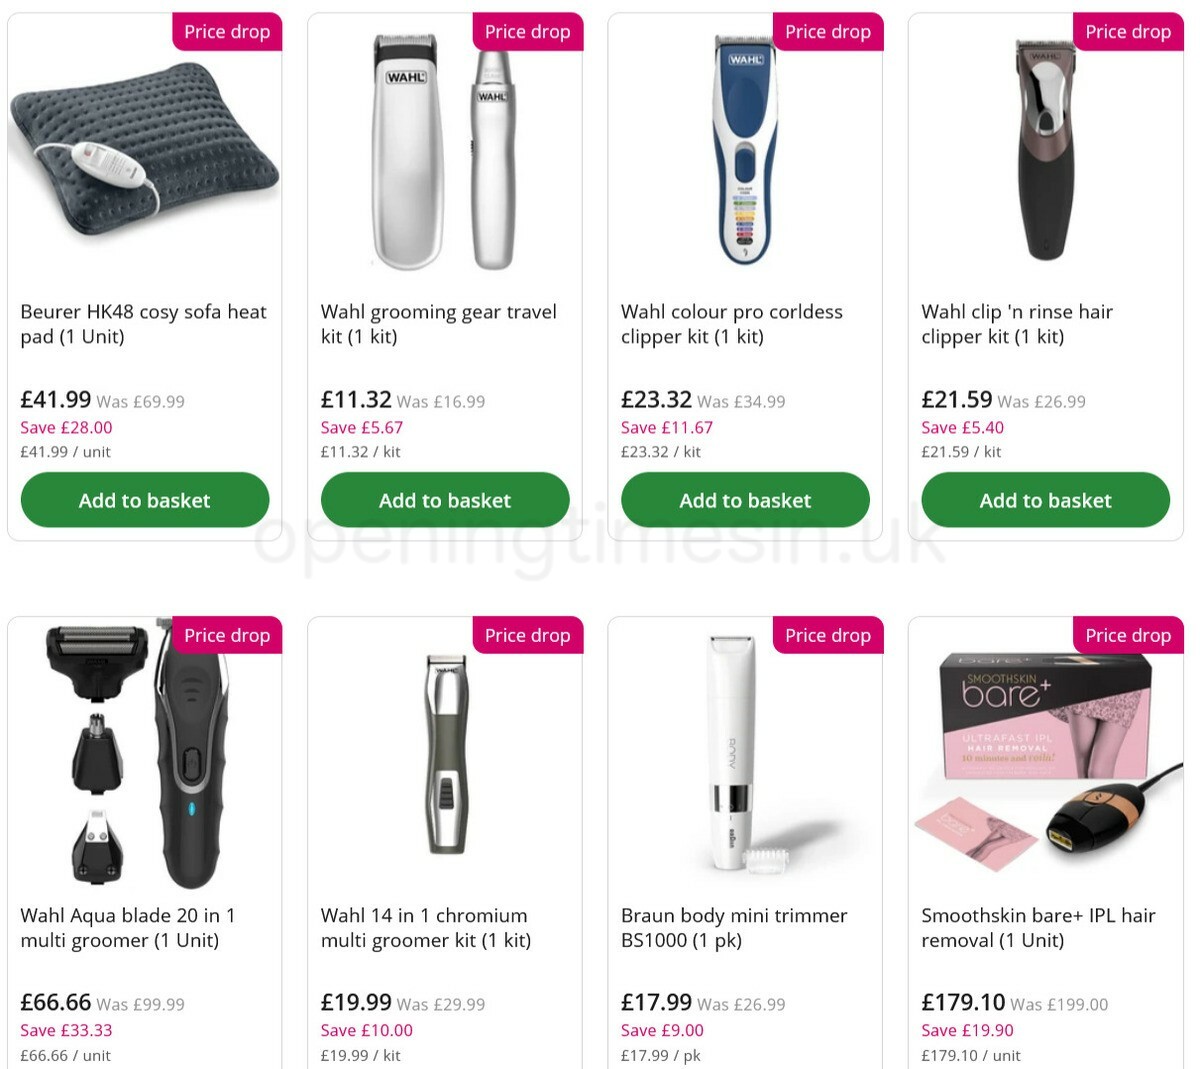 Lloyds Pharmacy Offers from 16 June